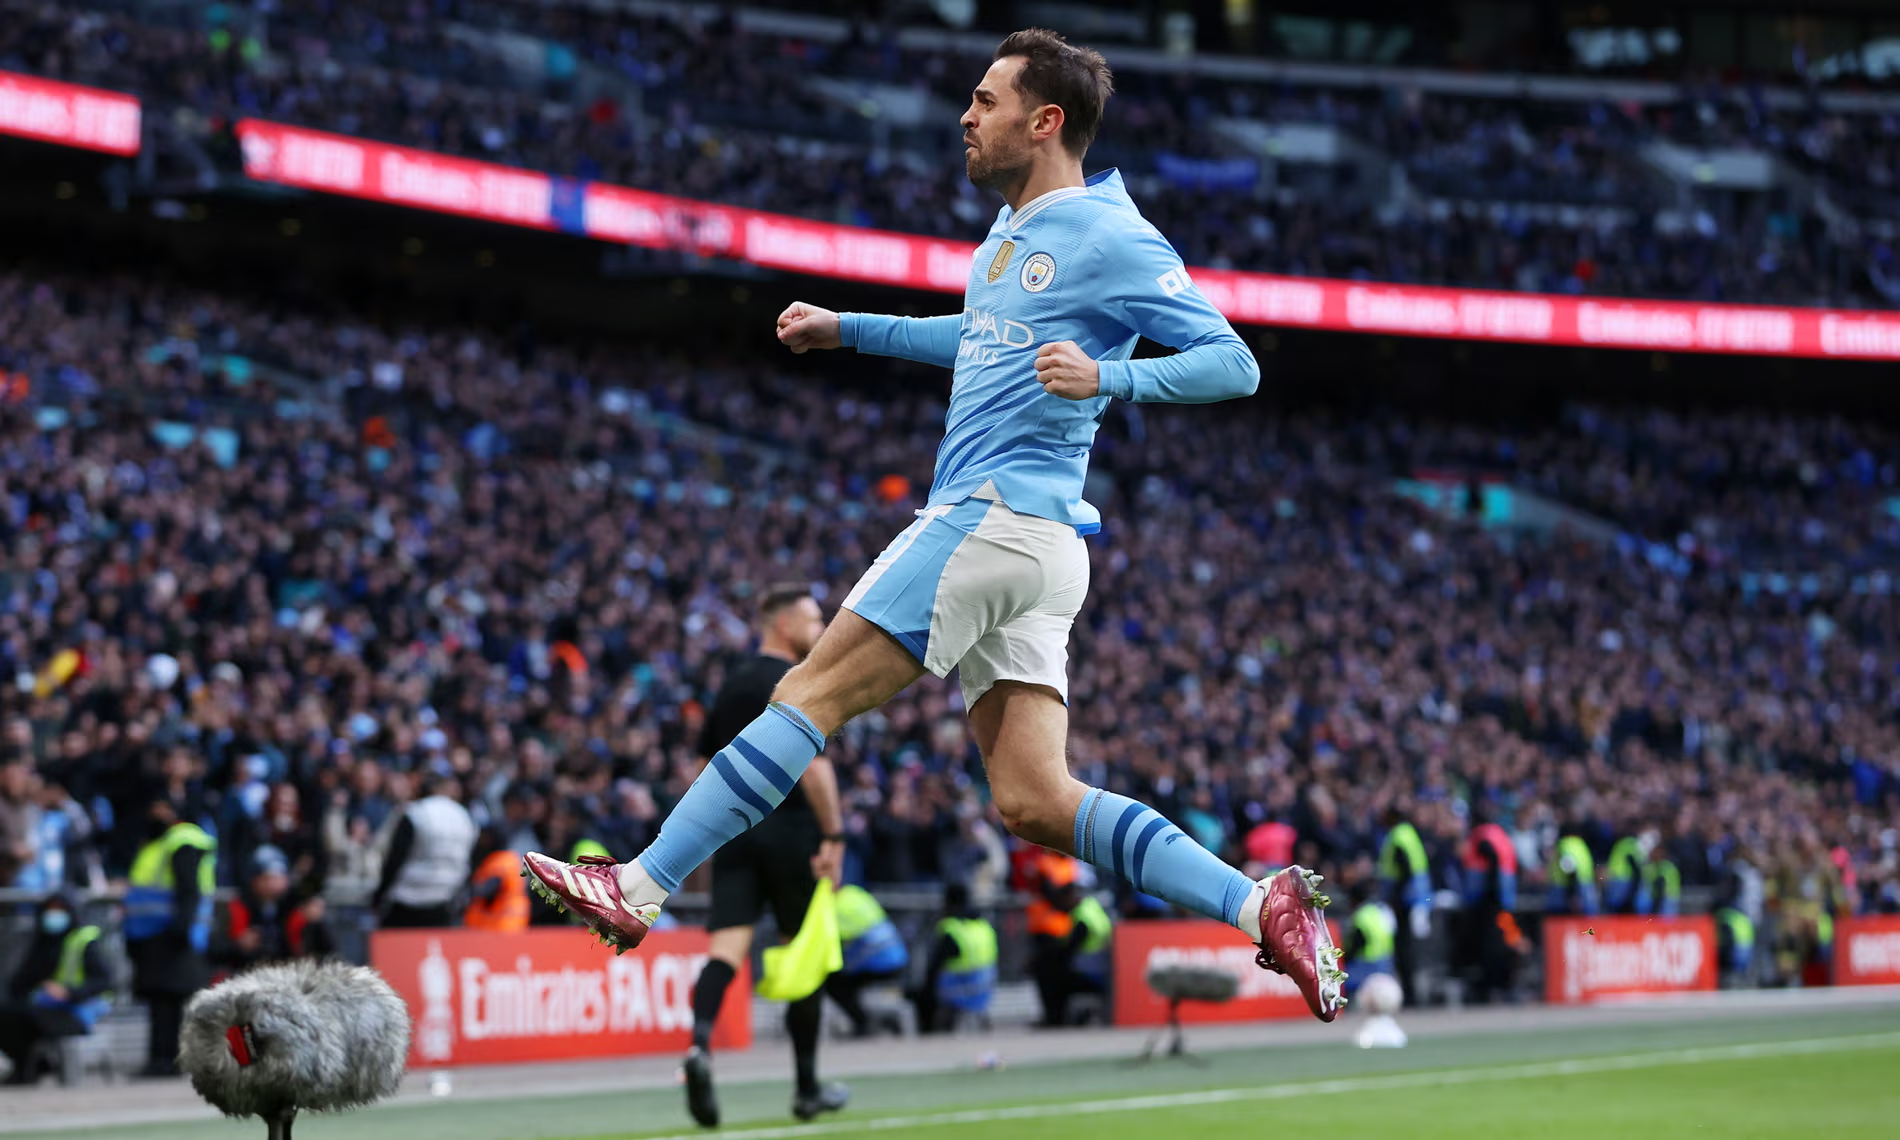 FA Cup: Man City advances to Final after beating Chelsea